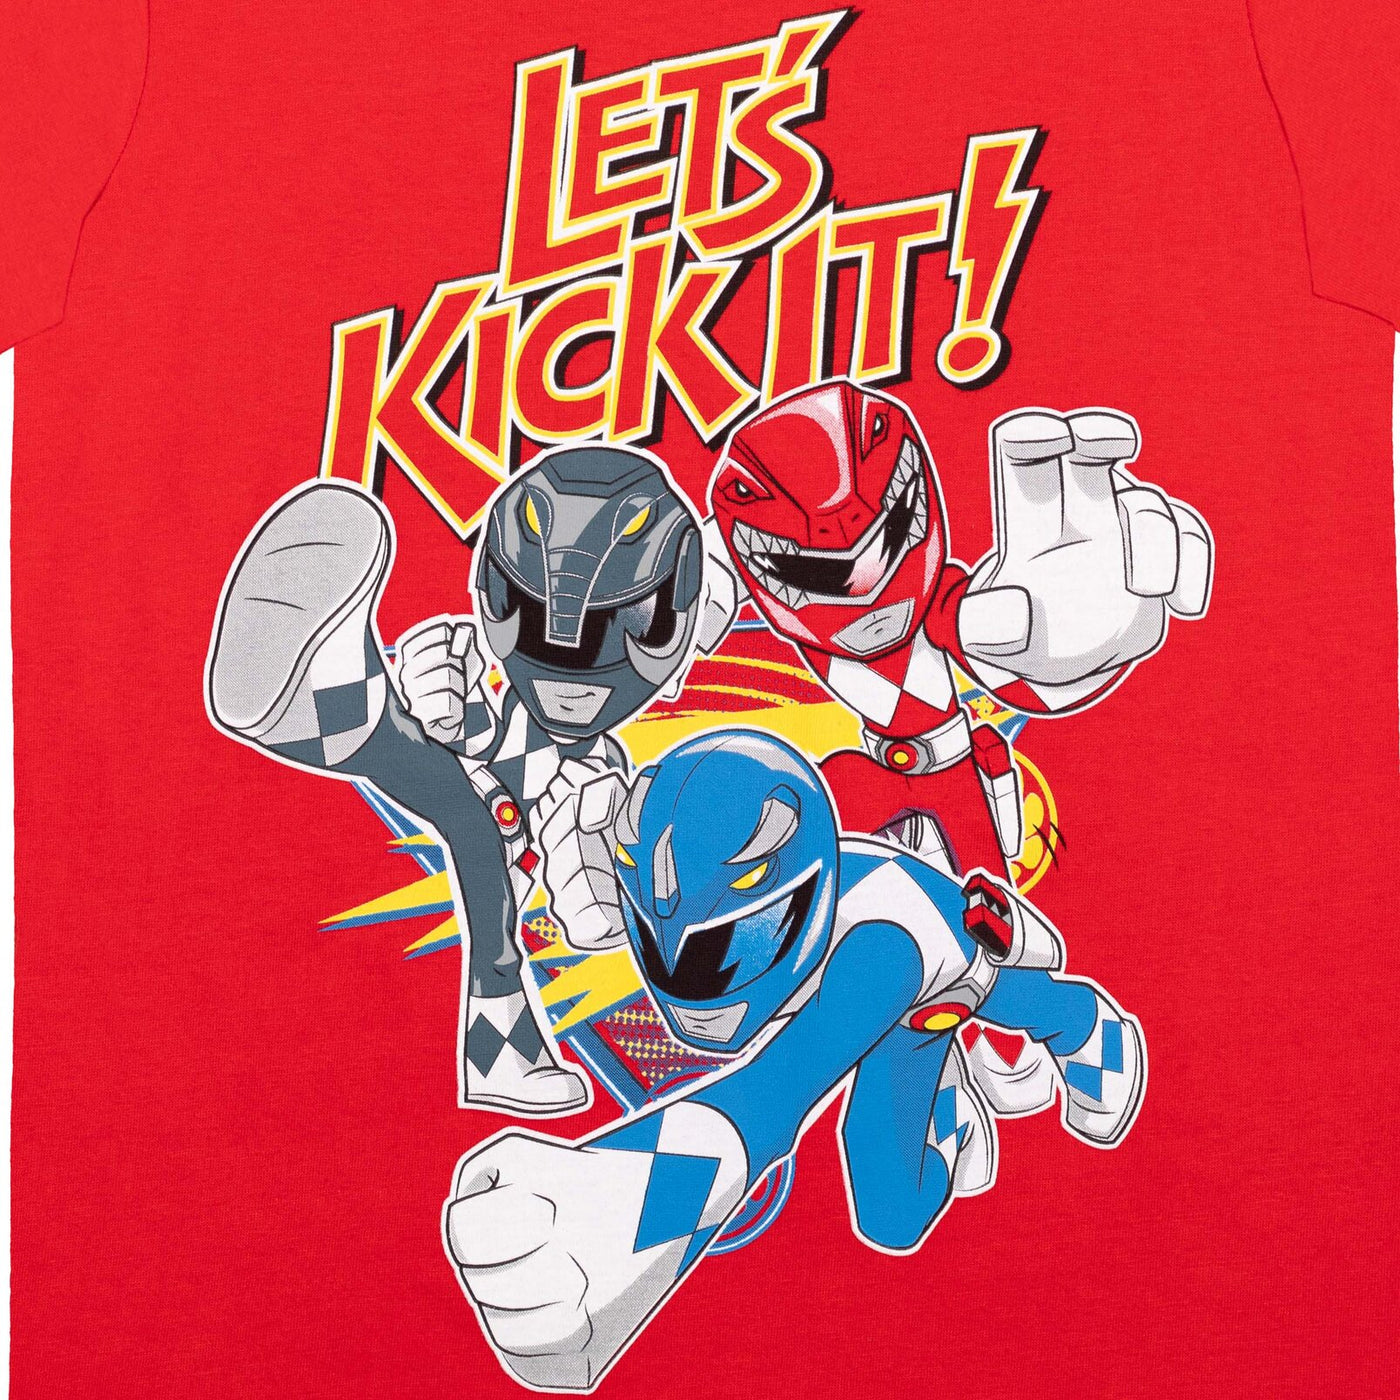 Power Rangers 3 Pack Graphic T-Shirts